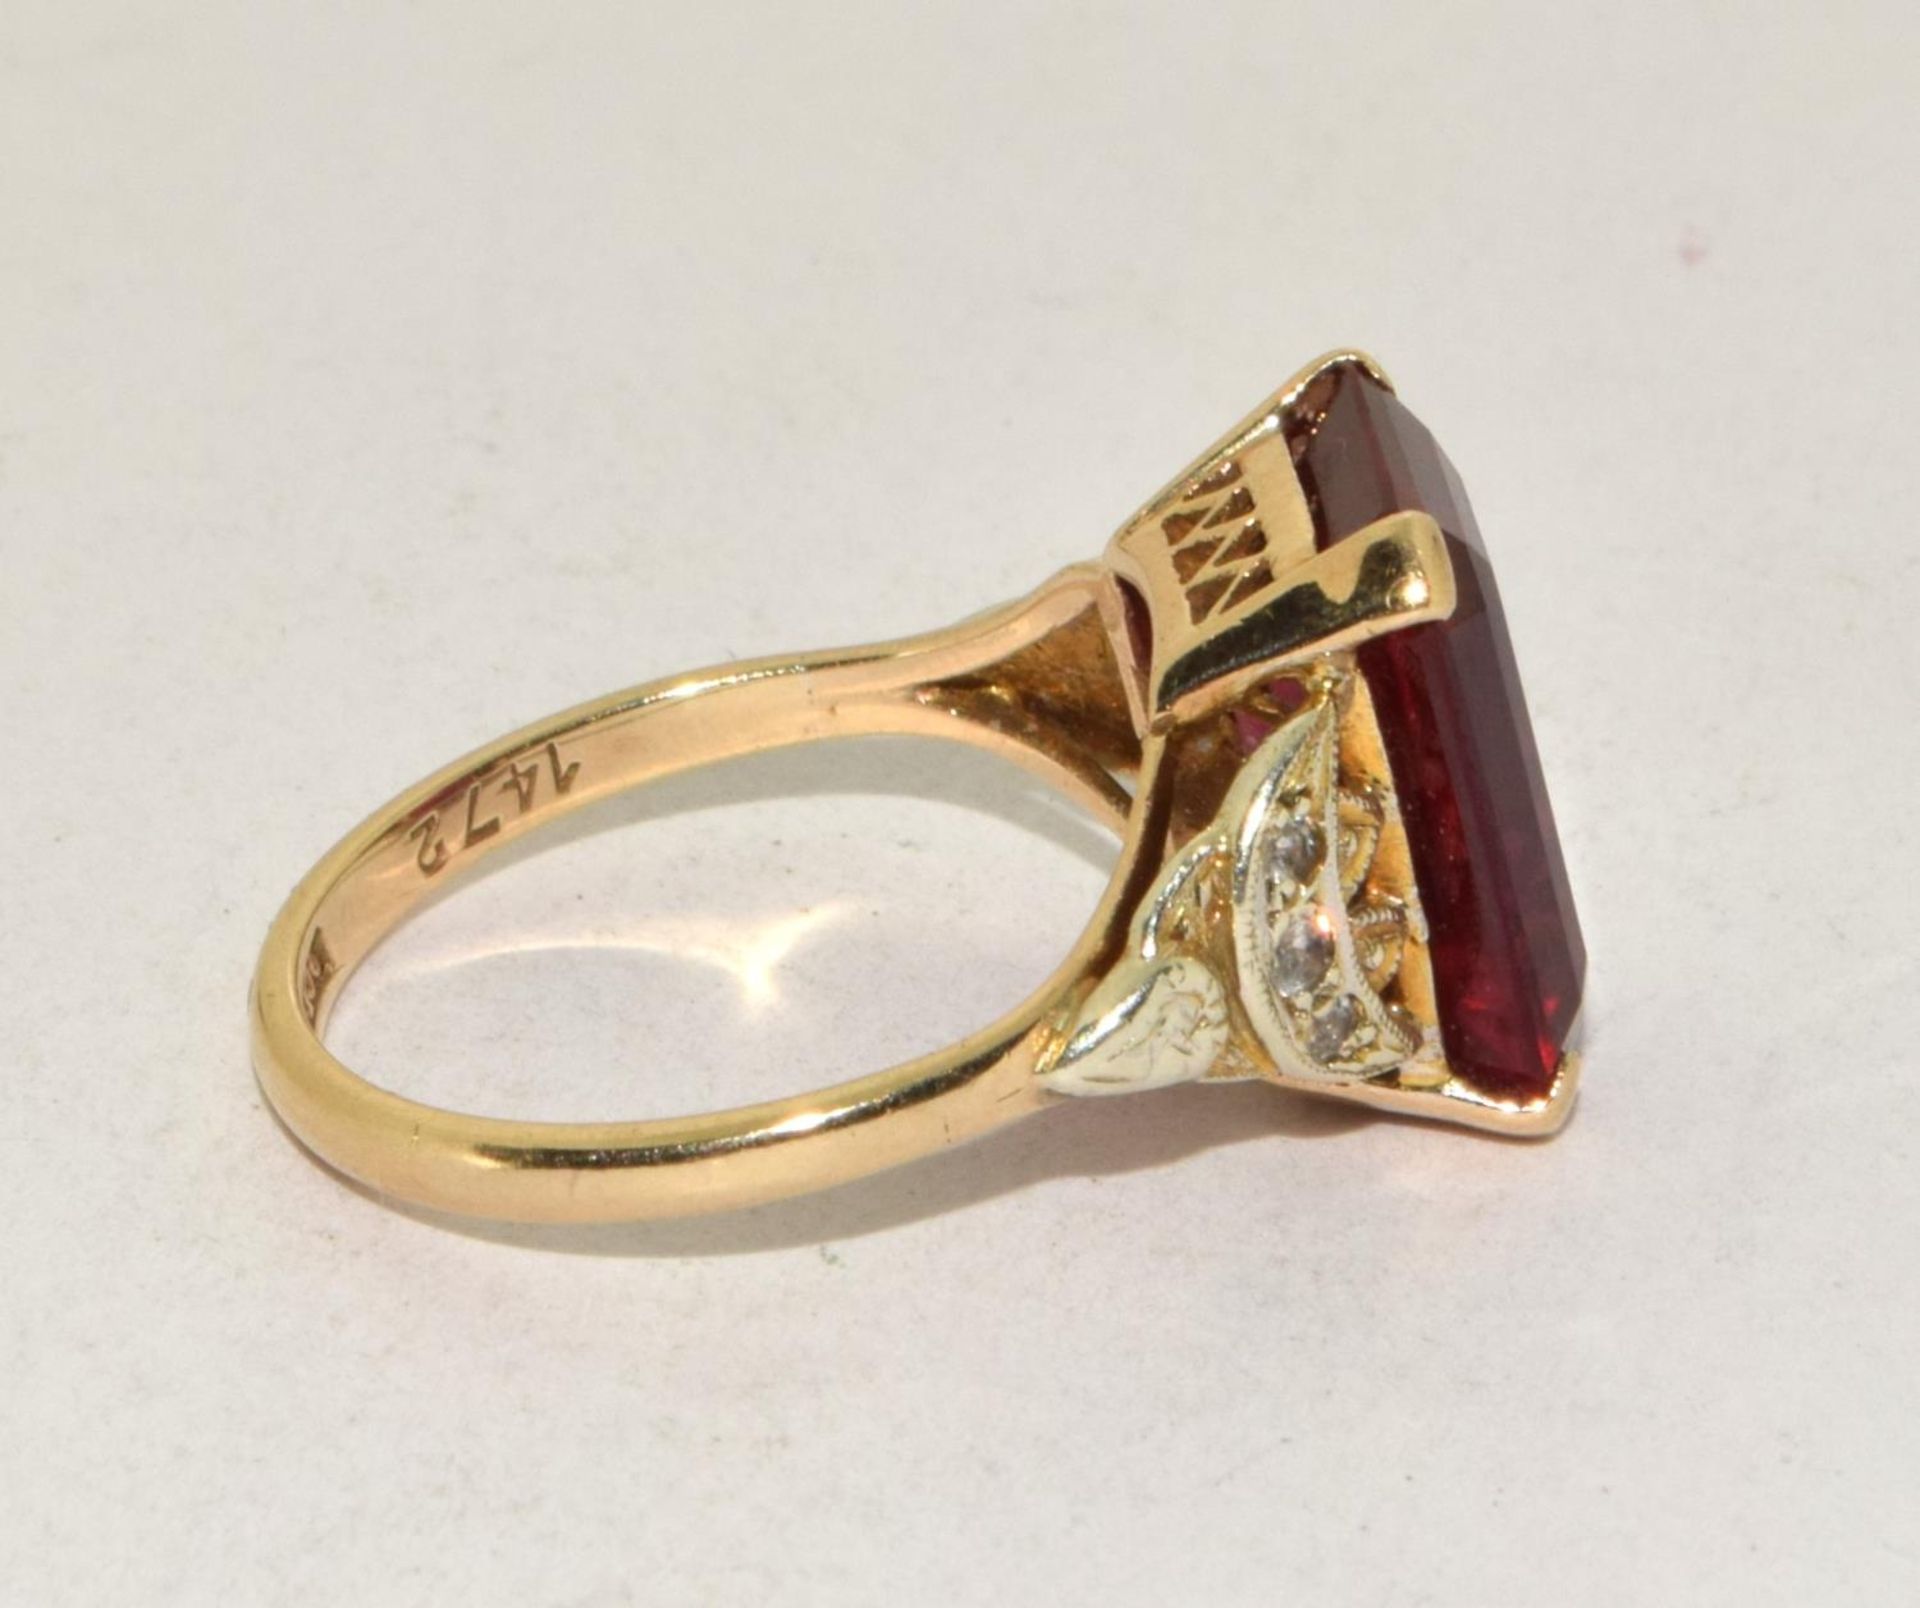 9ct gold ladies Large Ruby square set ring with diamonds to the shank set in an open work setting - Image 4 of 5